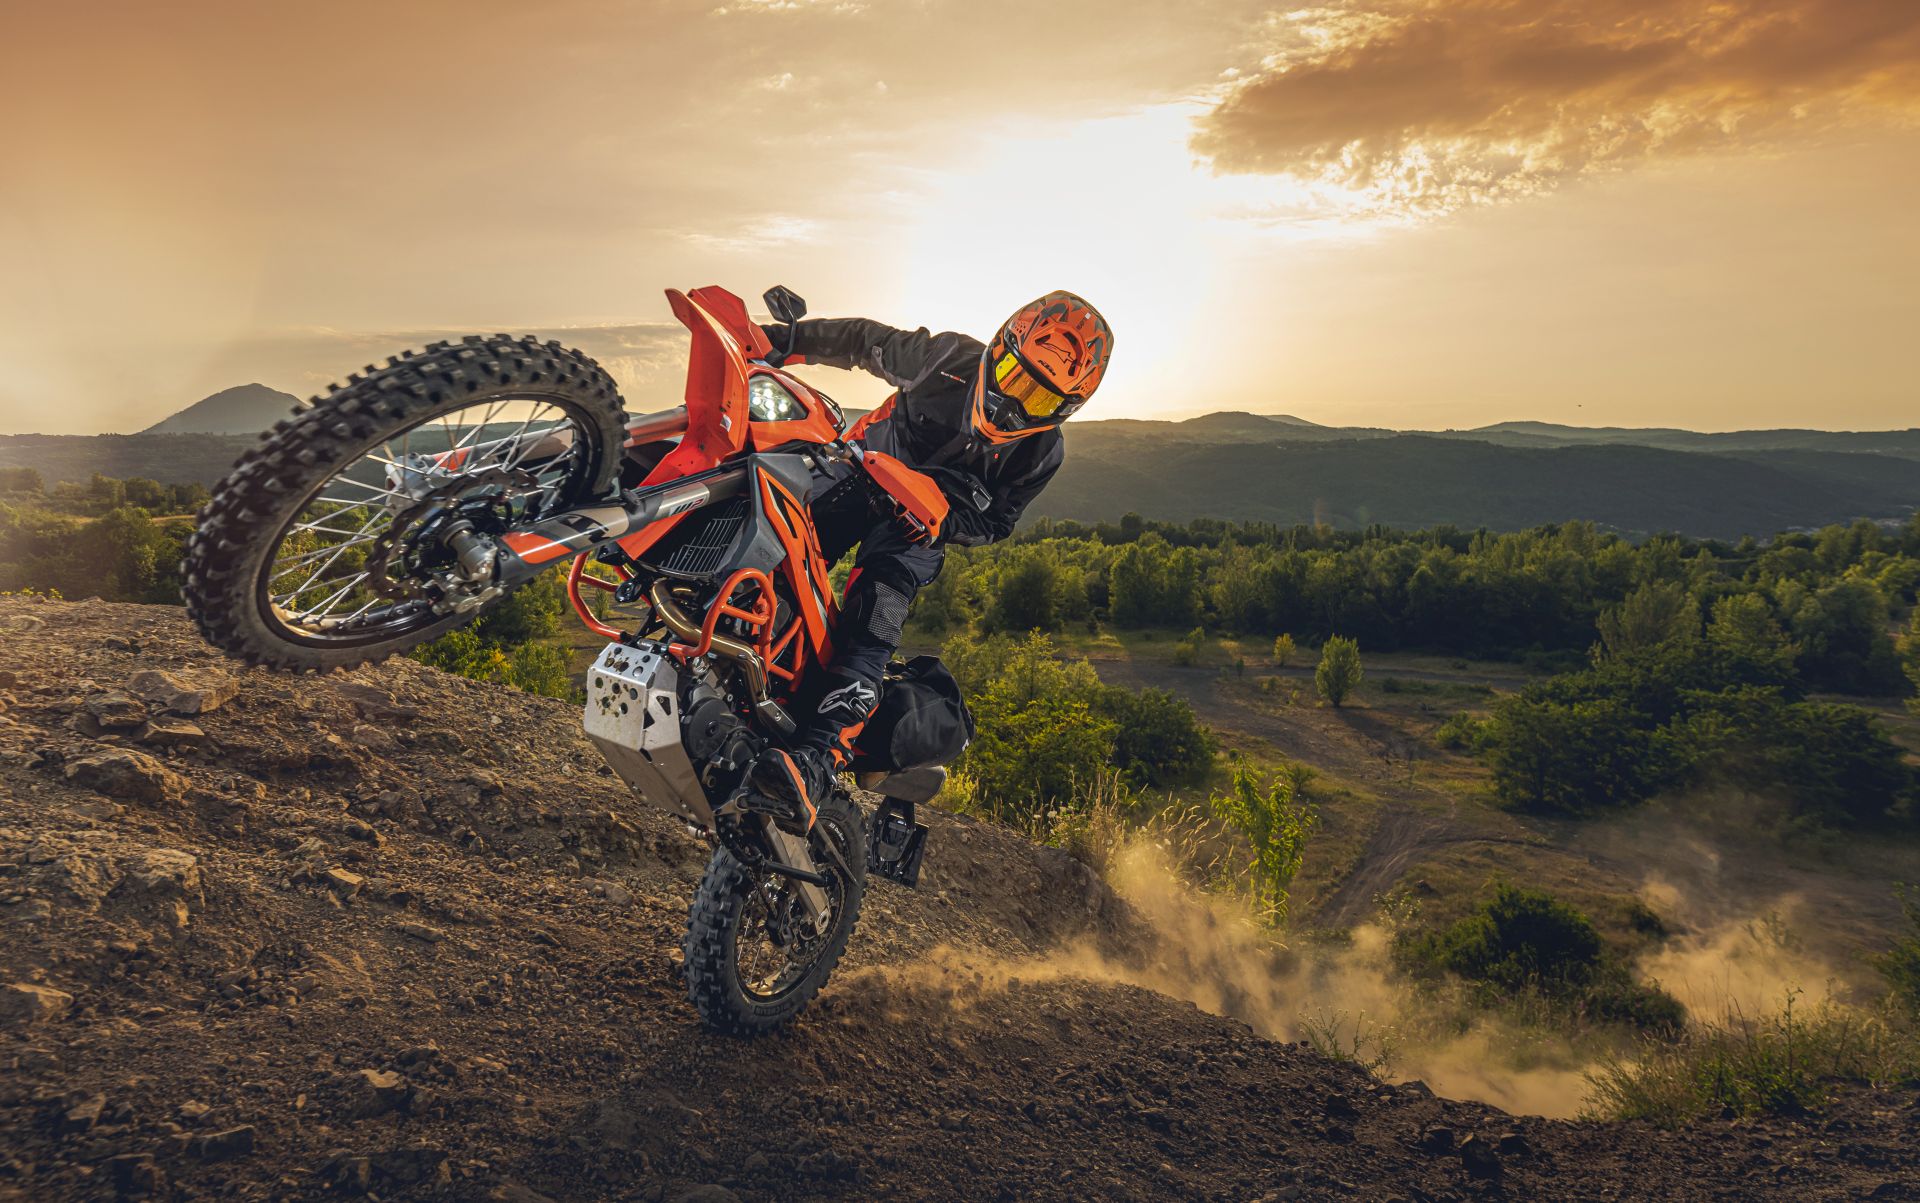 466803_MY23 KTM 690 ENDURO R – Action – Cat B_MY23_01 PICTURES (1)